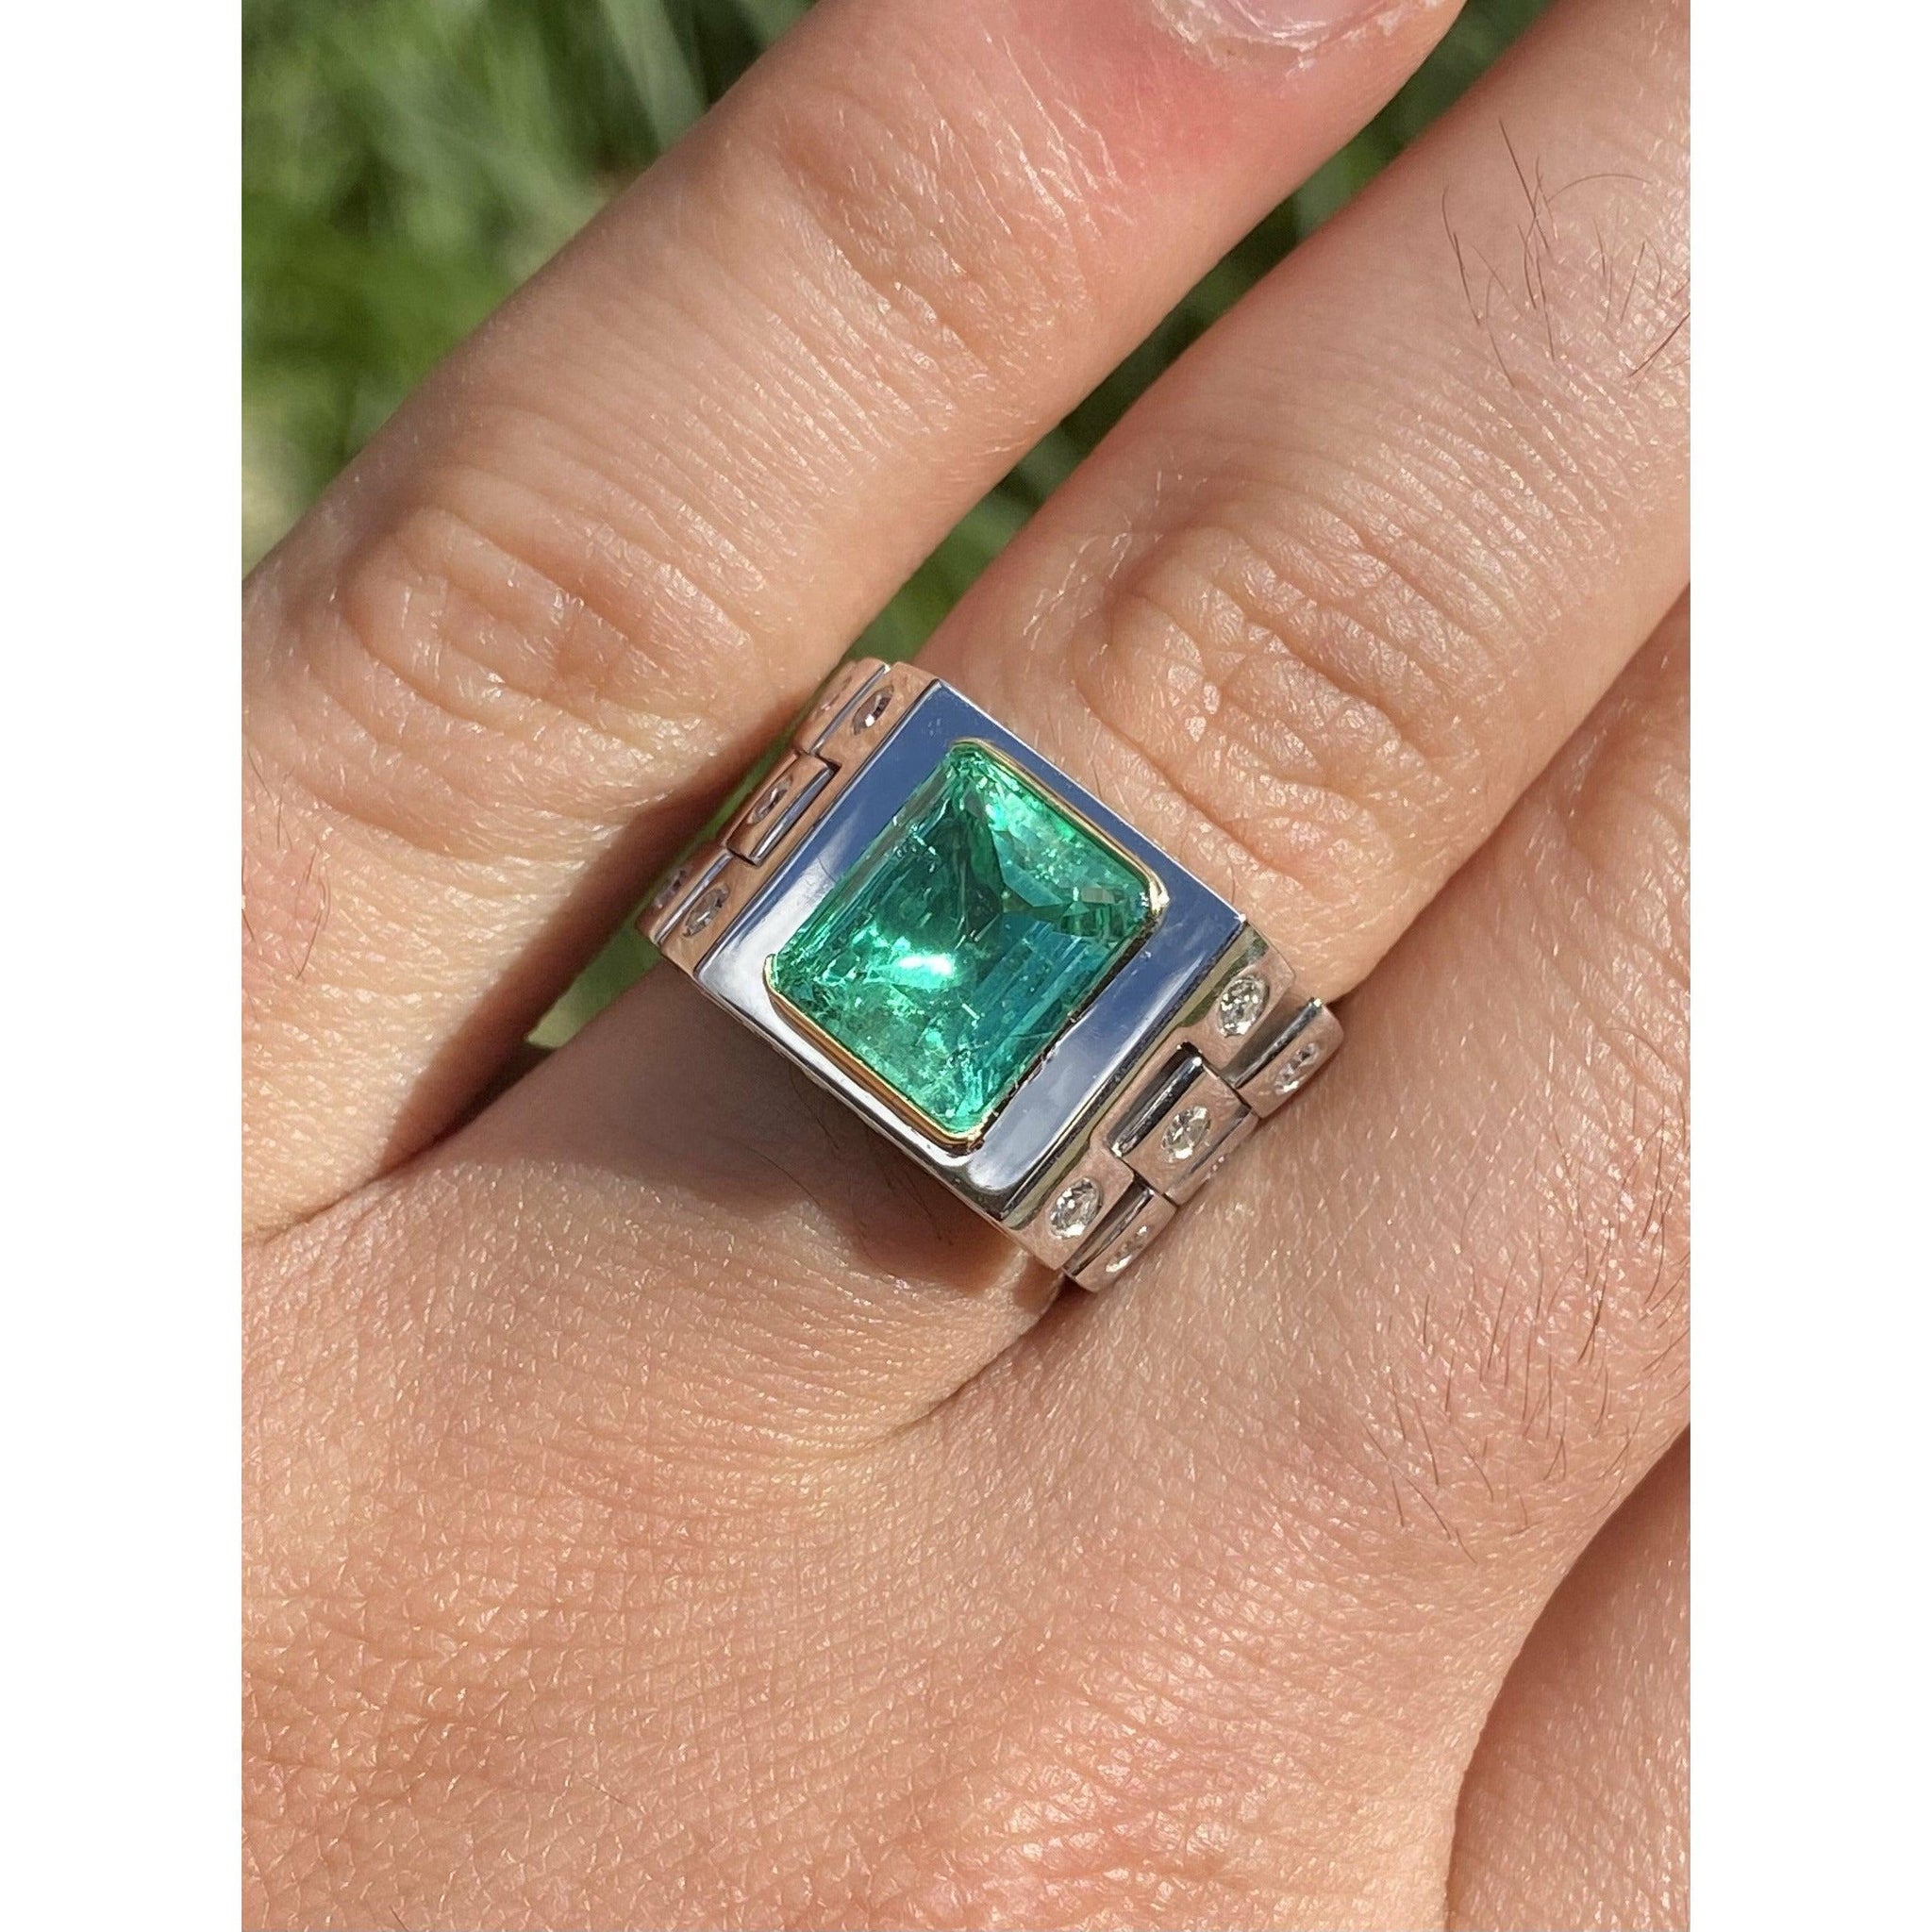 GRS certified 3.43 carat Colombian Emerald Mens Link Ring - ASSAY